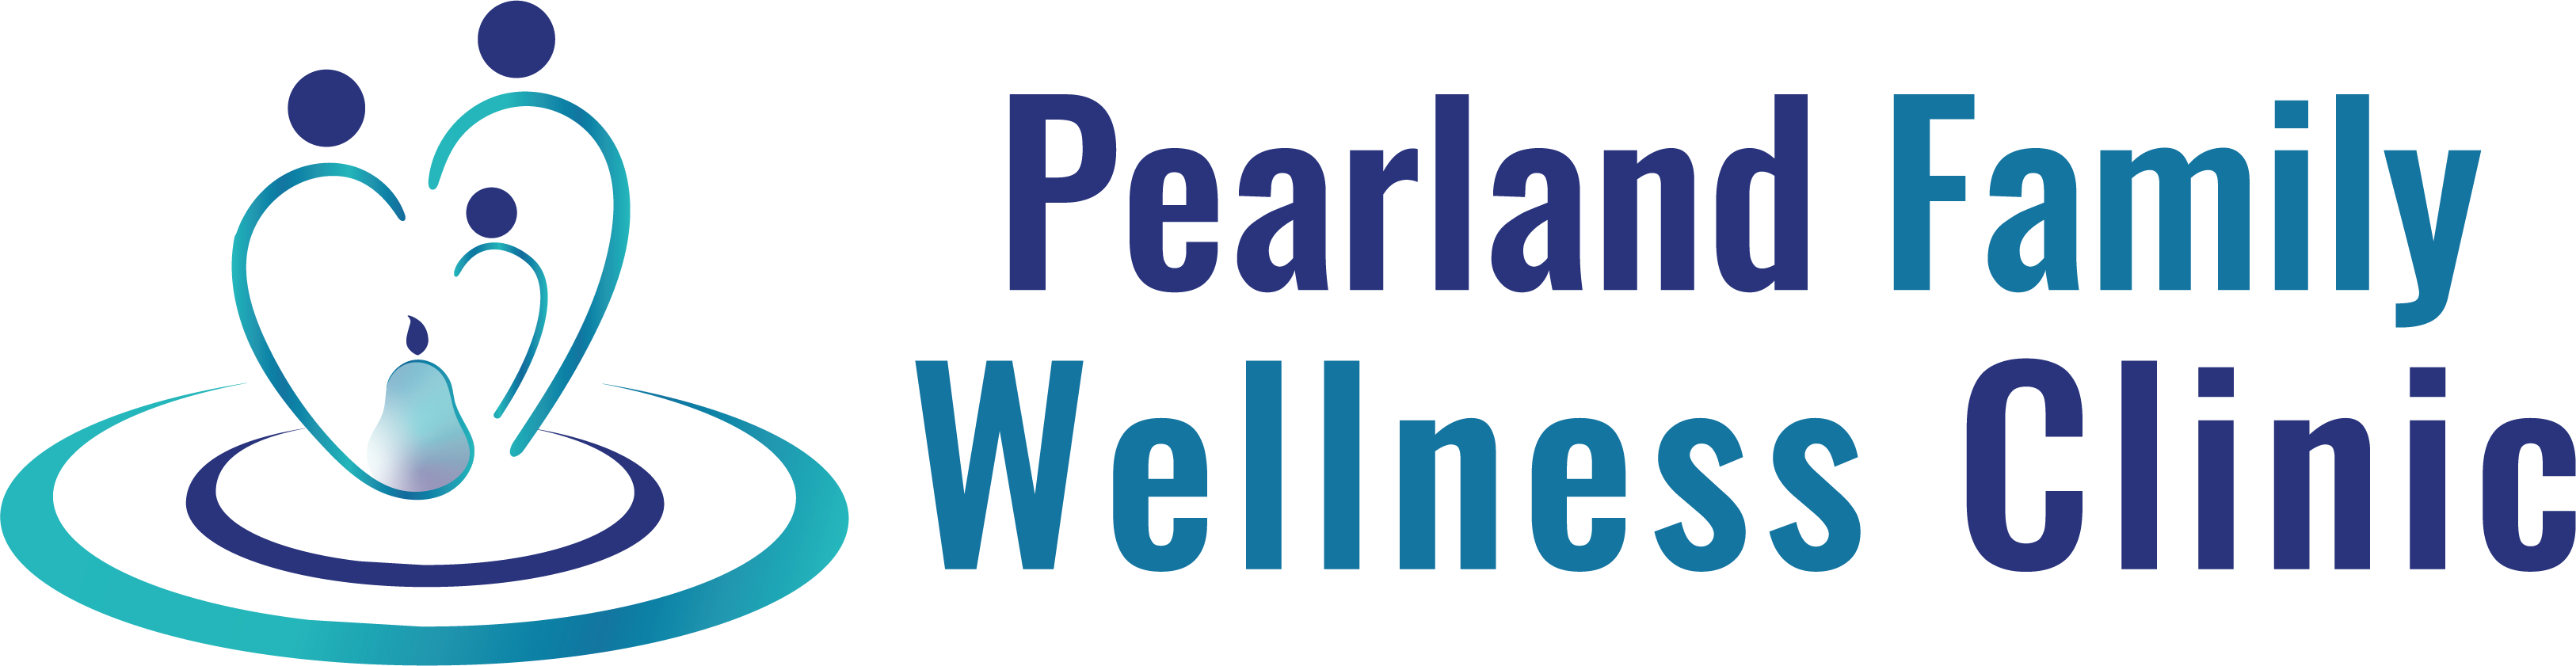 Pearland Family Wellness Clinic